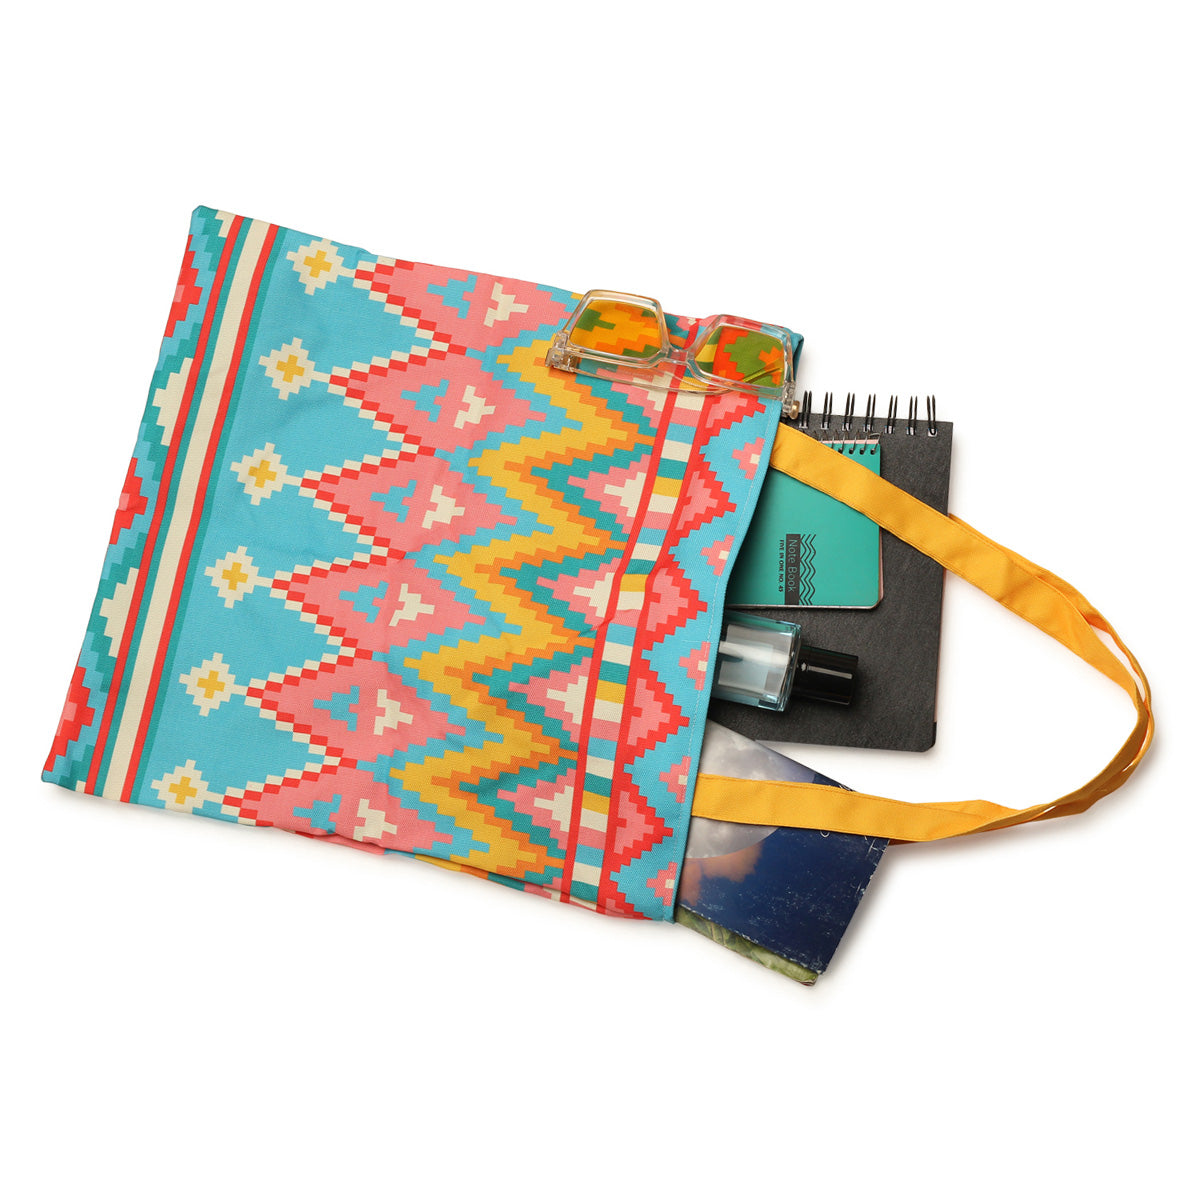 Eye-catching tote bag adorned with a colorful geometric pattern, a chic accessory for any occasion.